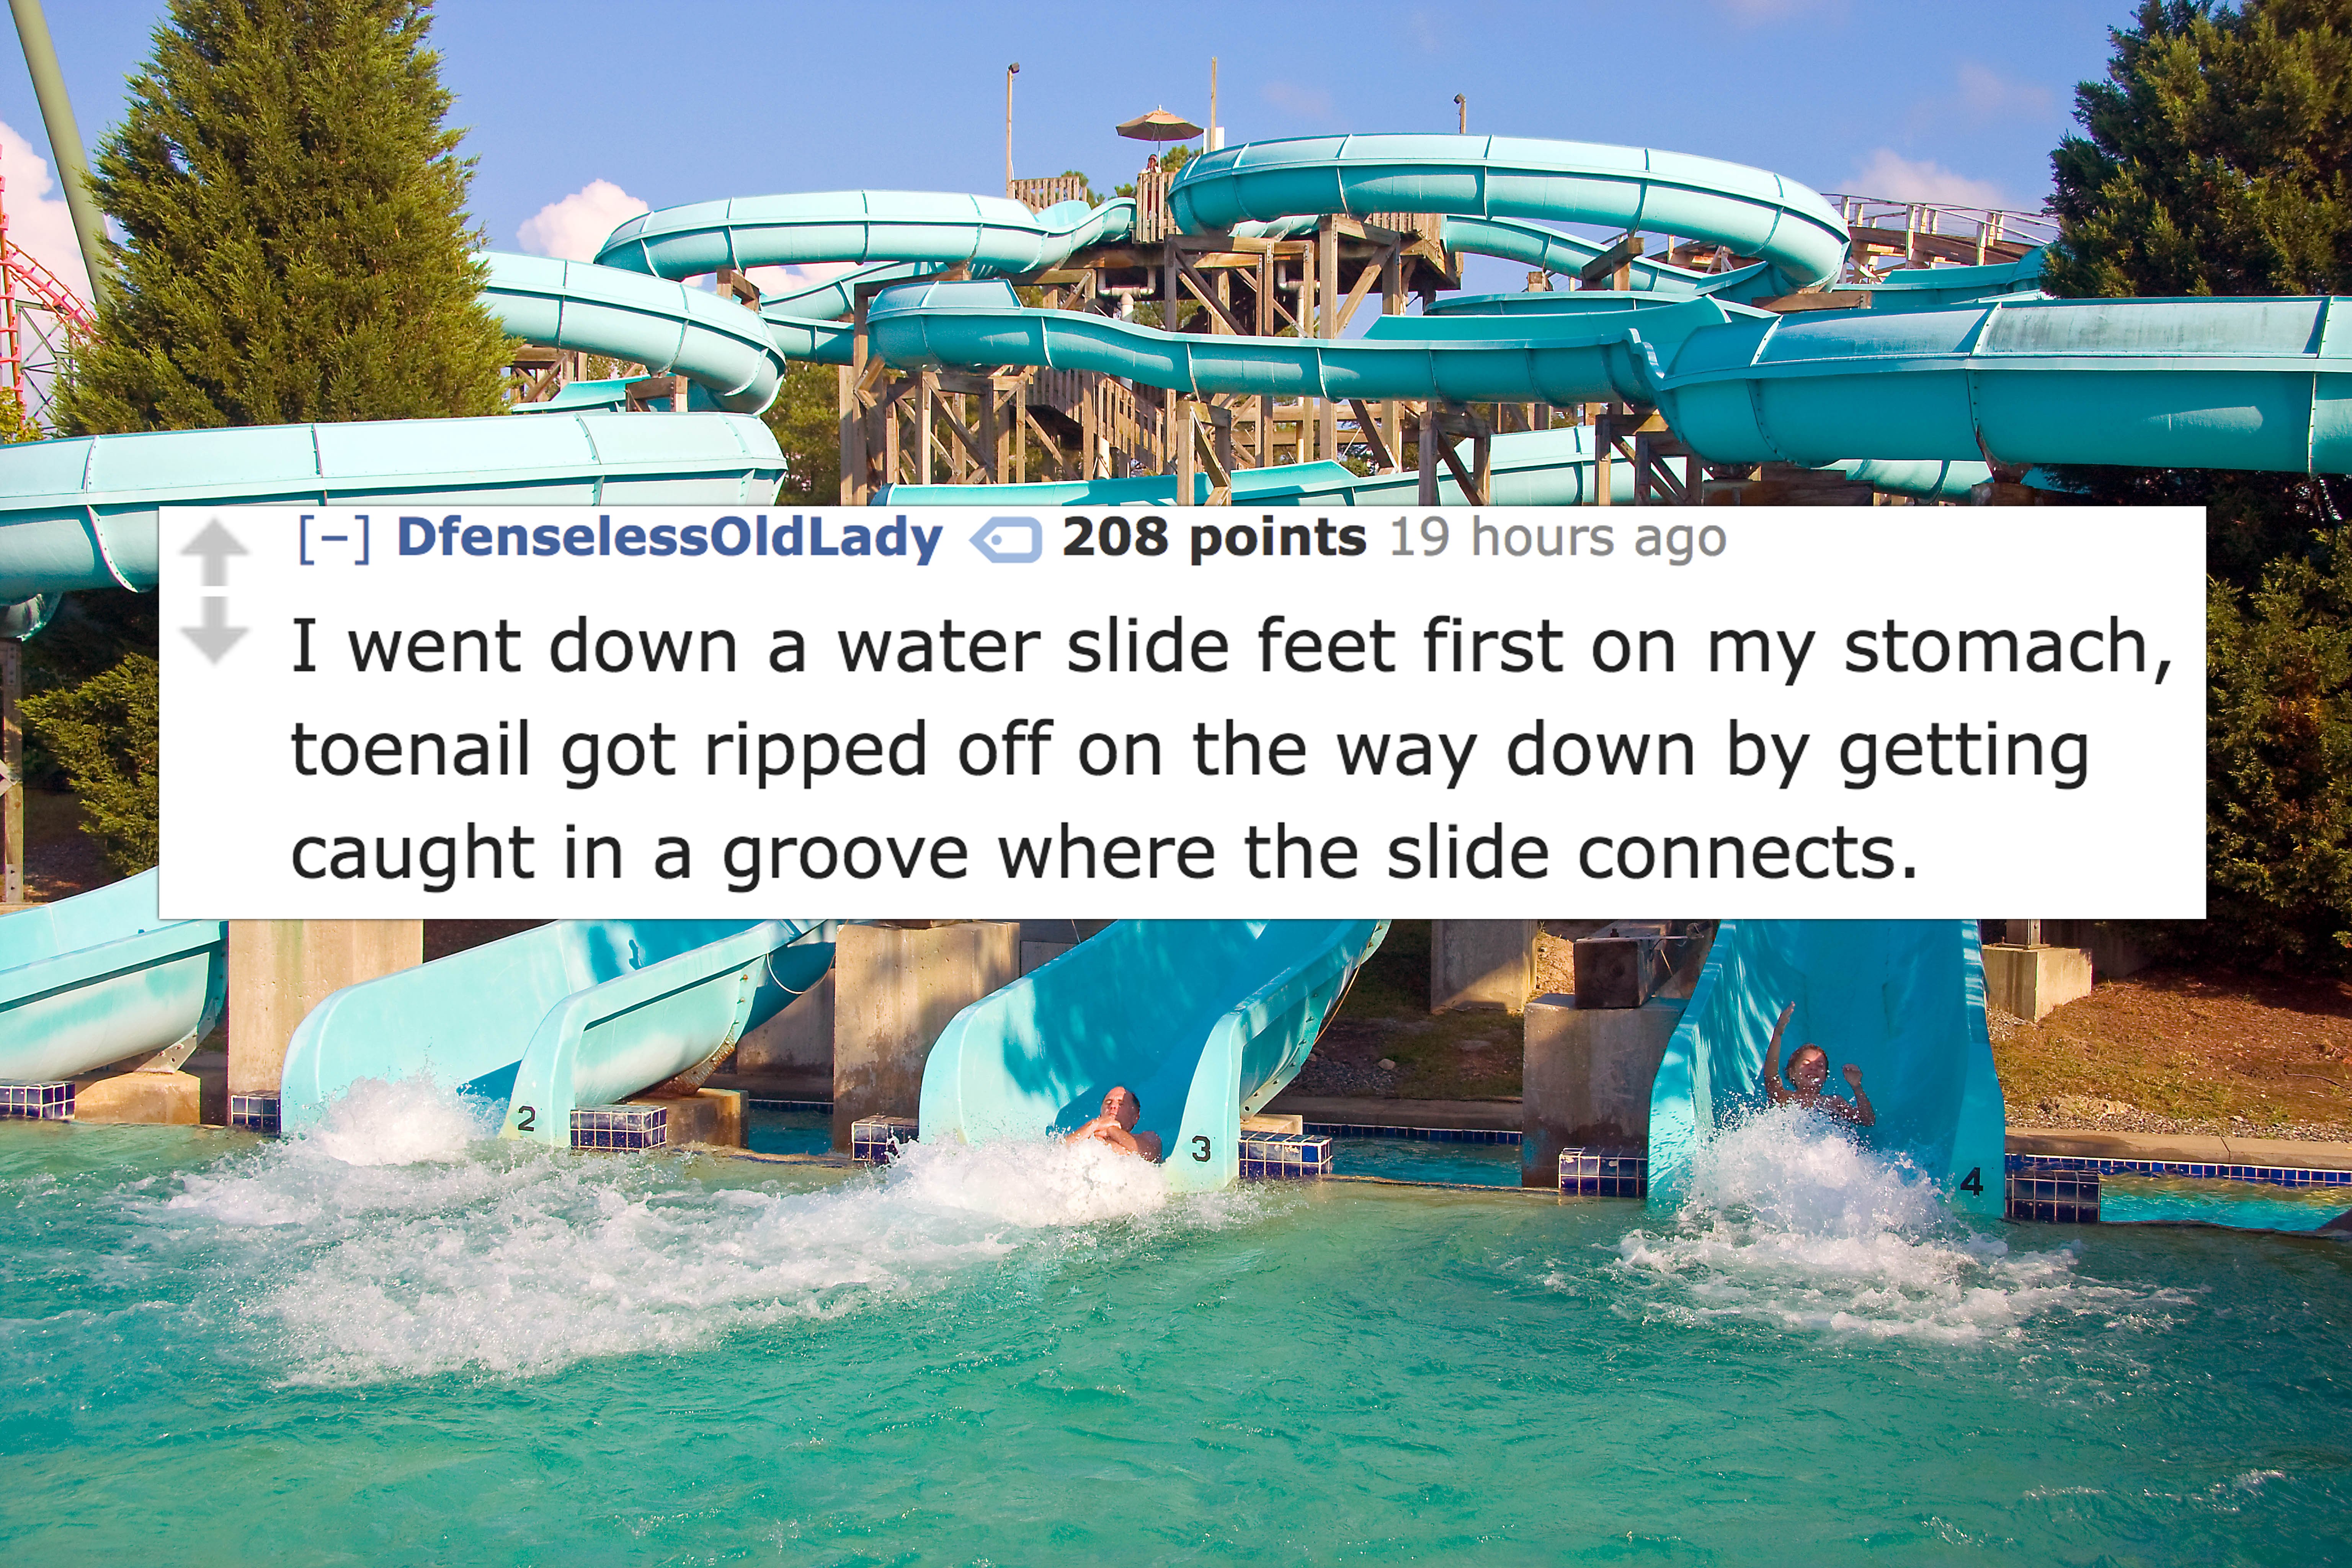 soak city kings dominion water park - DfenselessOldLady 208 points 19 hours ago I went down a water slide feet first on my stomach, toenail got ripped off on the way down by getting caught in a groove where the slide connects.